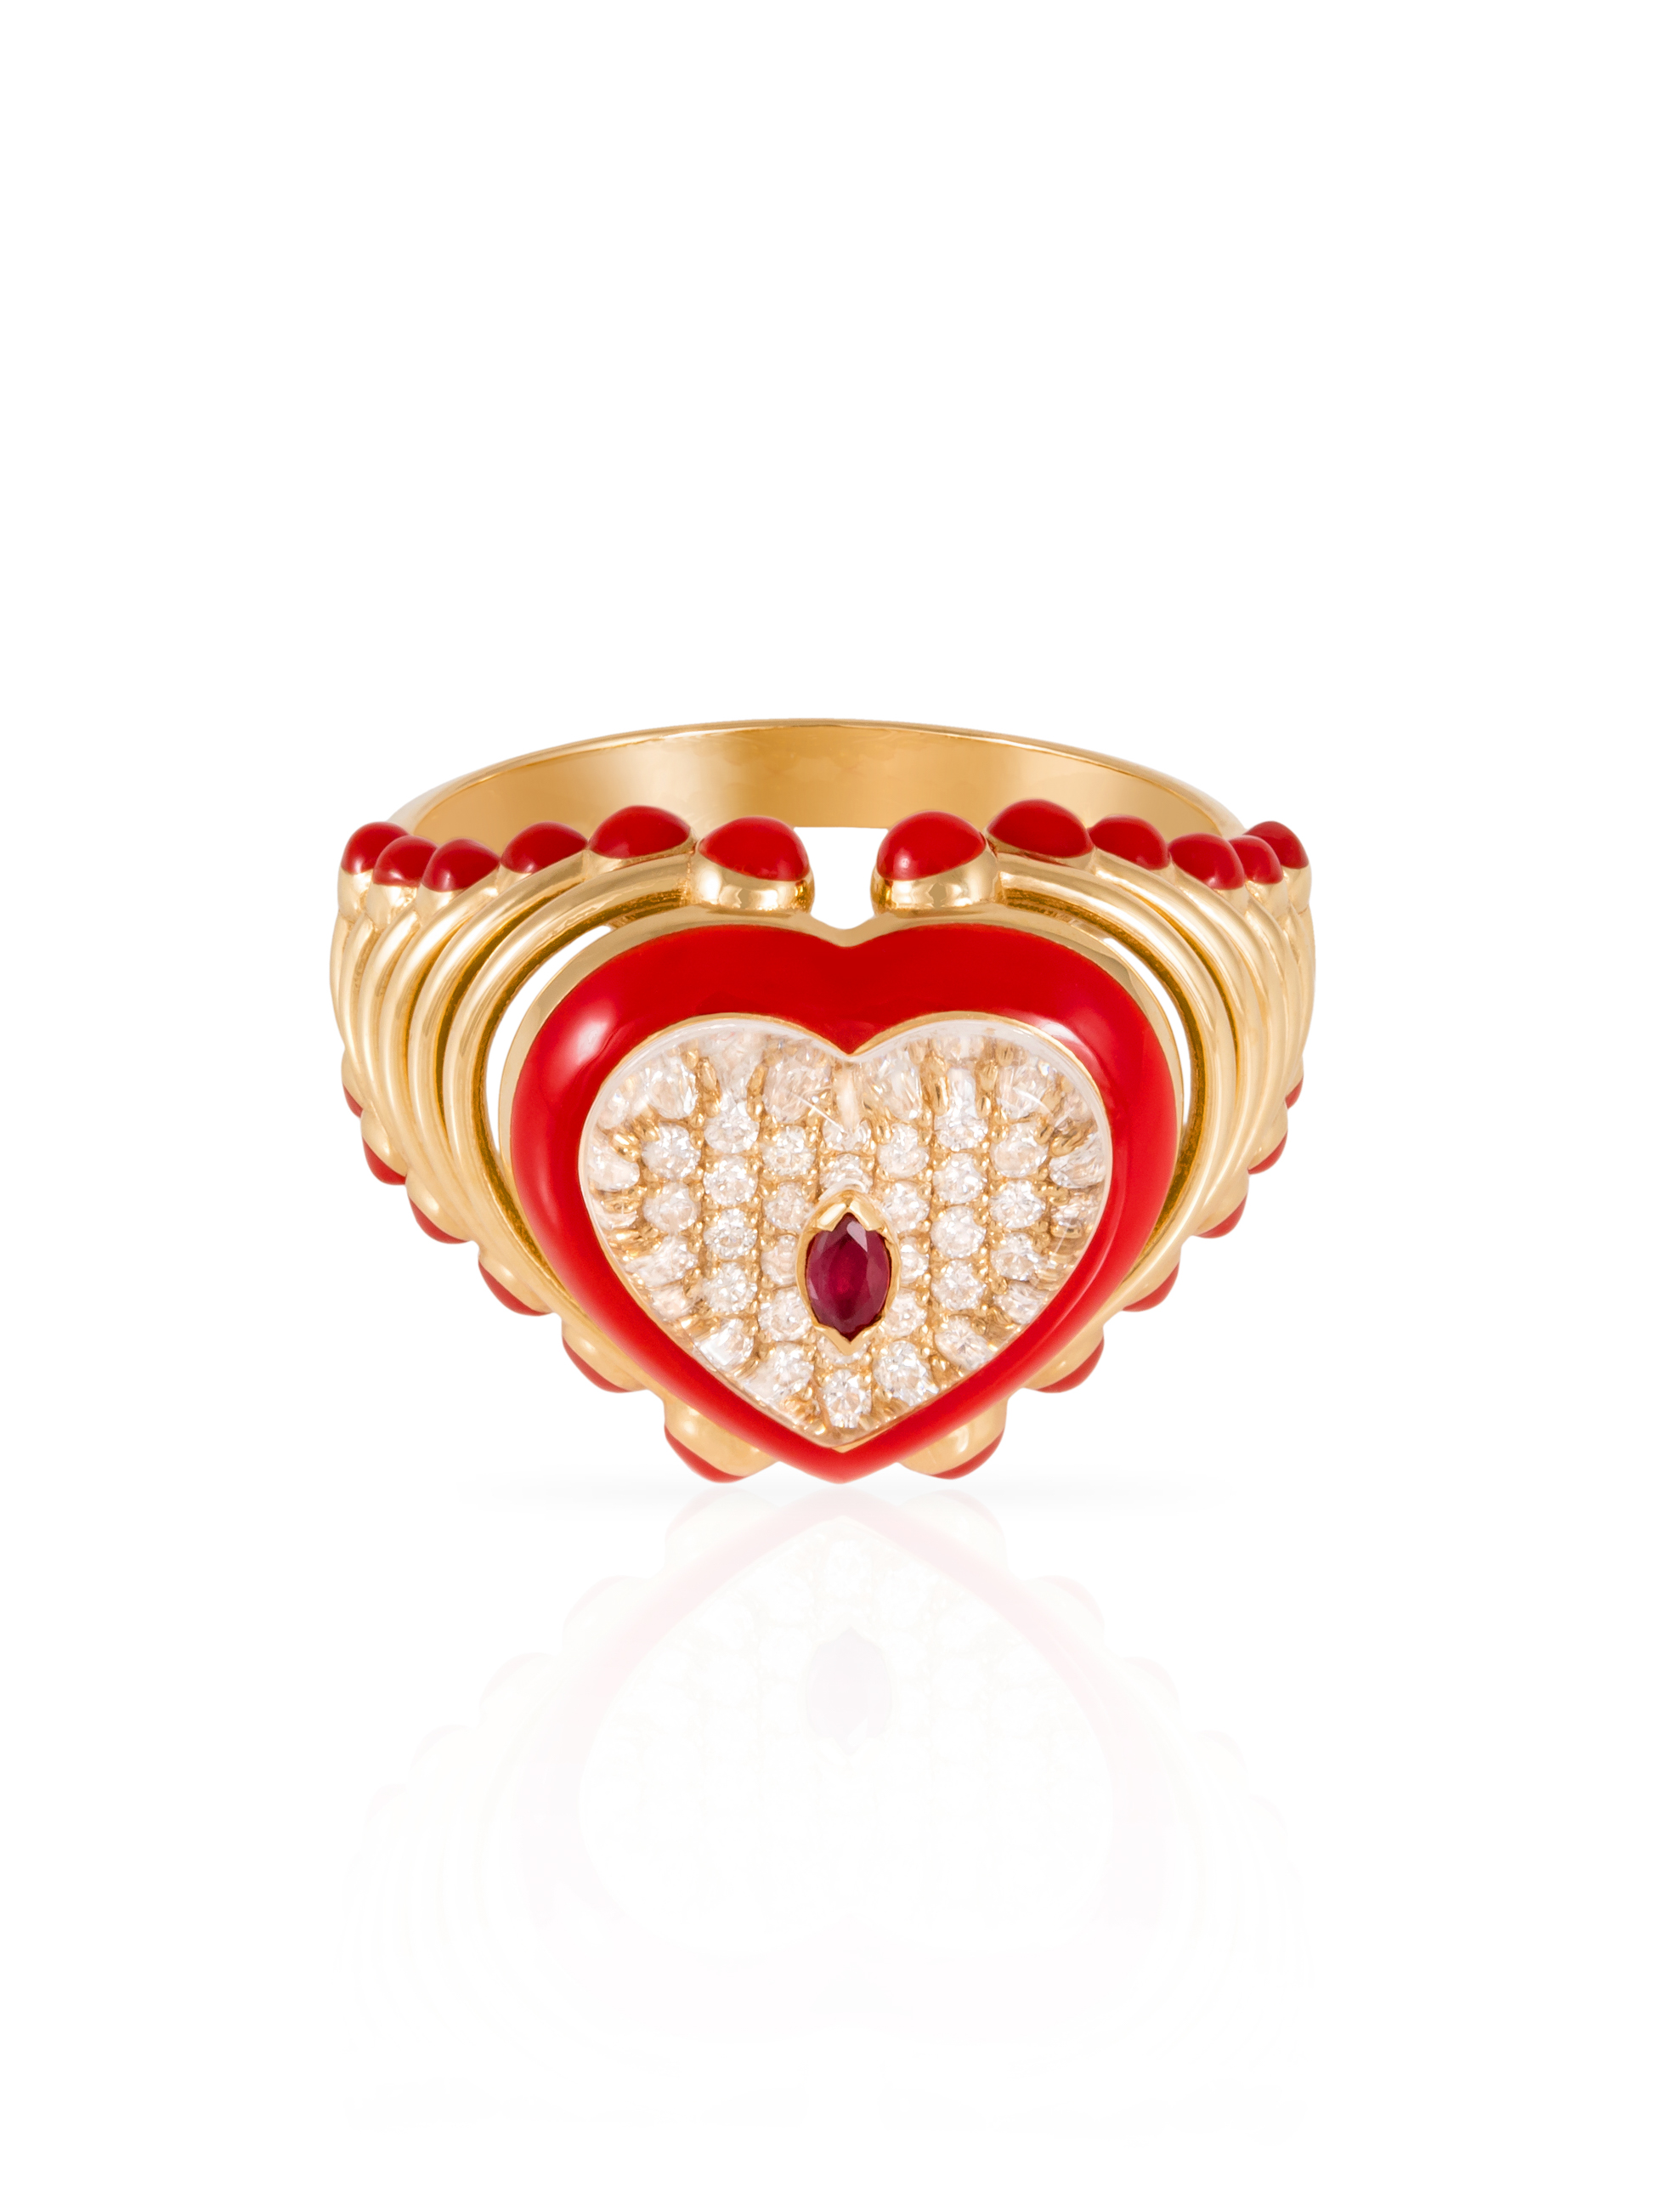 Buy University Trendz Stylish Red Heart Cubic Zirconia Rings for Girls &  Women with Artificial Red Rose Flower Box at Amazon.in